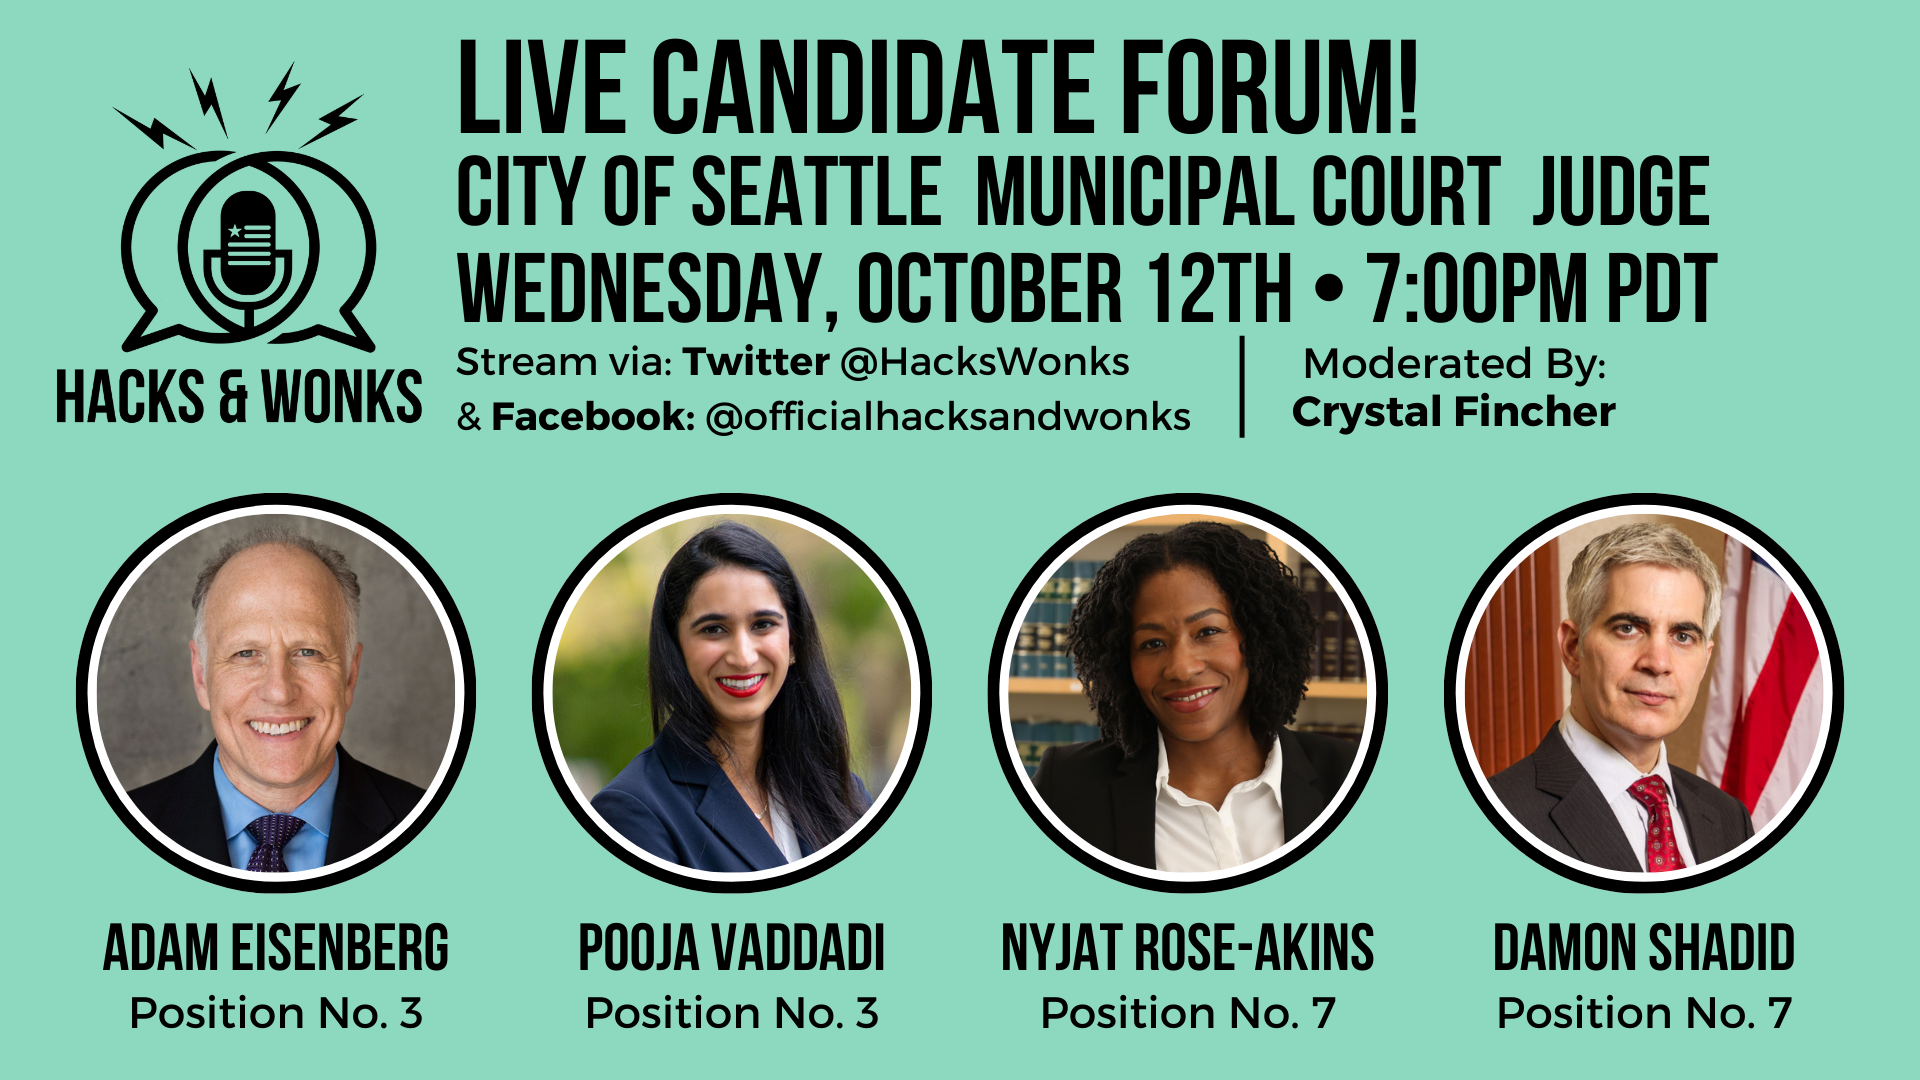 A poster advertising Hacks & Wonks' Seattle Municipal Judge Canddiate Forum for Wednesday, October 12th at 7:00pm PDT.  Stream via Twitter @HacksWonks & Facebook @officialhackswonks. Moderated by Crystal Fincher.